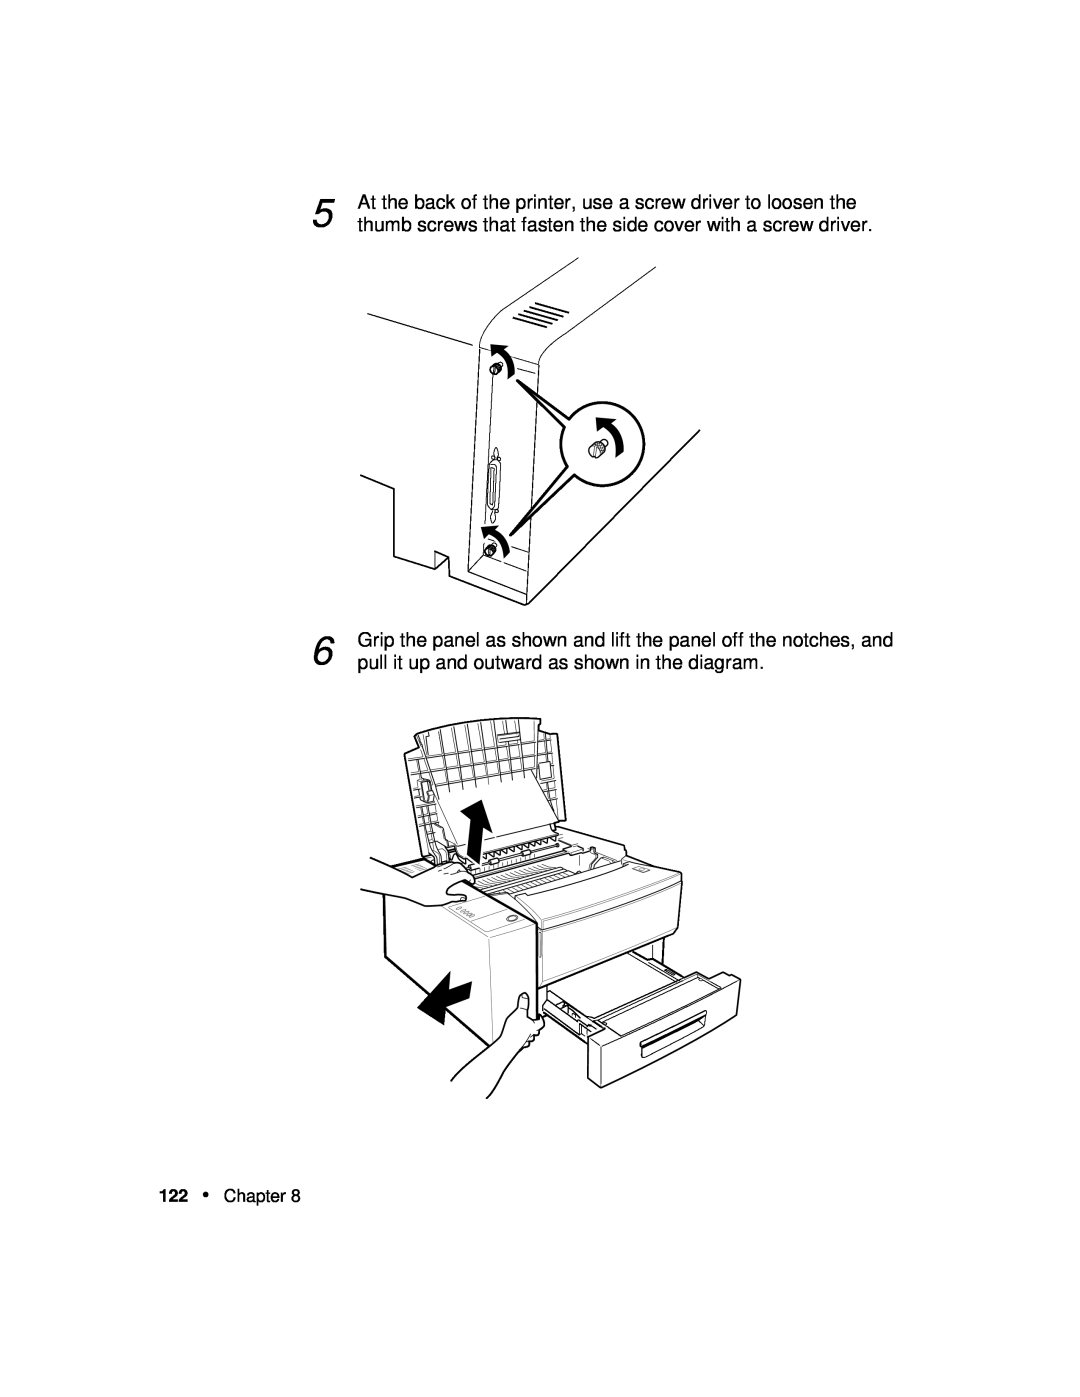 Xerox P12 At the back of the printer, use a screw driver to loosen the, pull it up and outward as shown in the diagram 